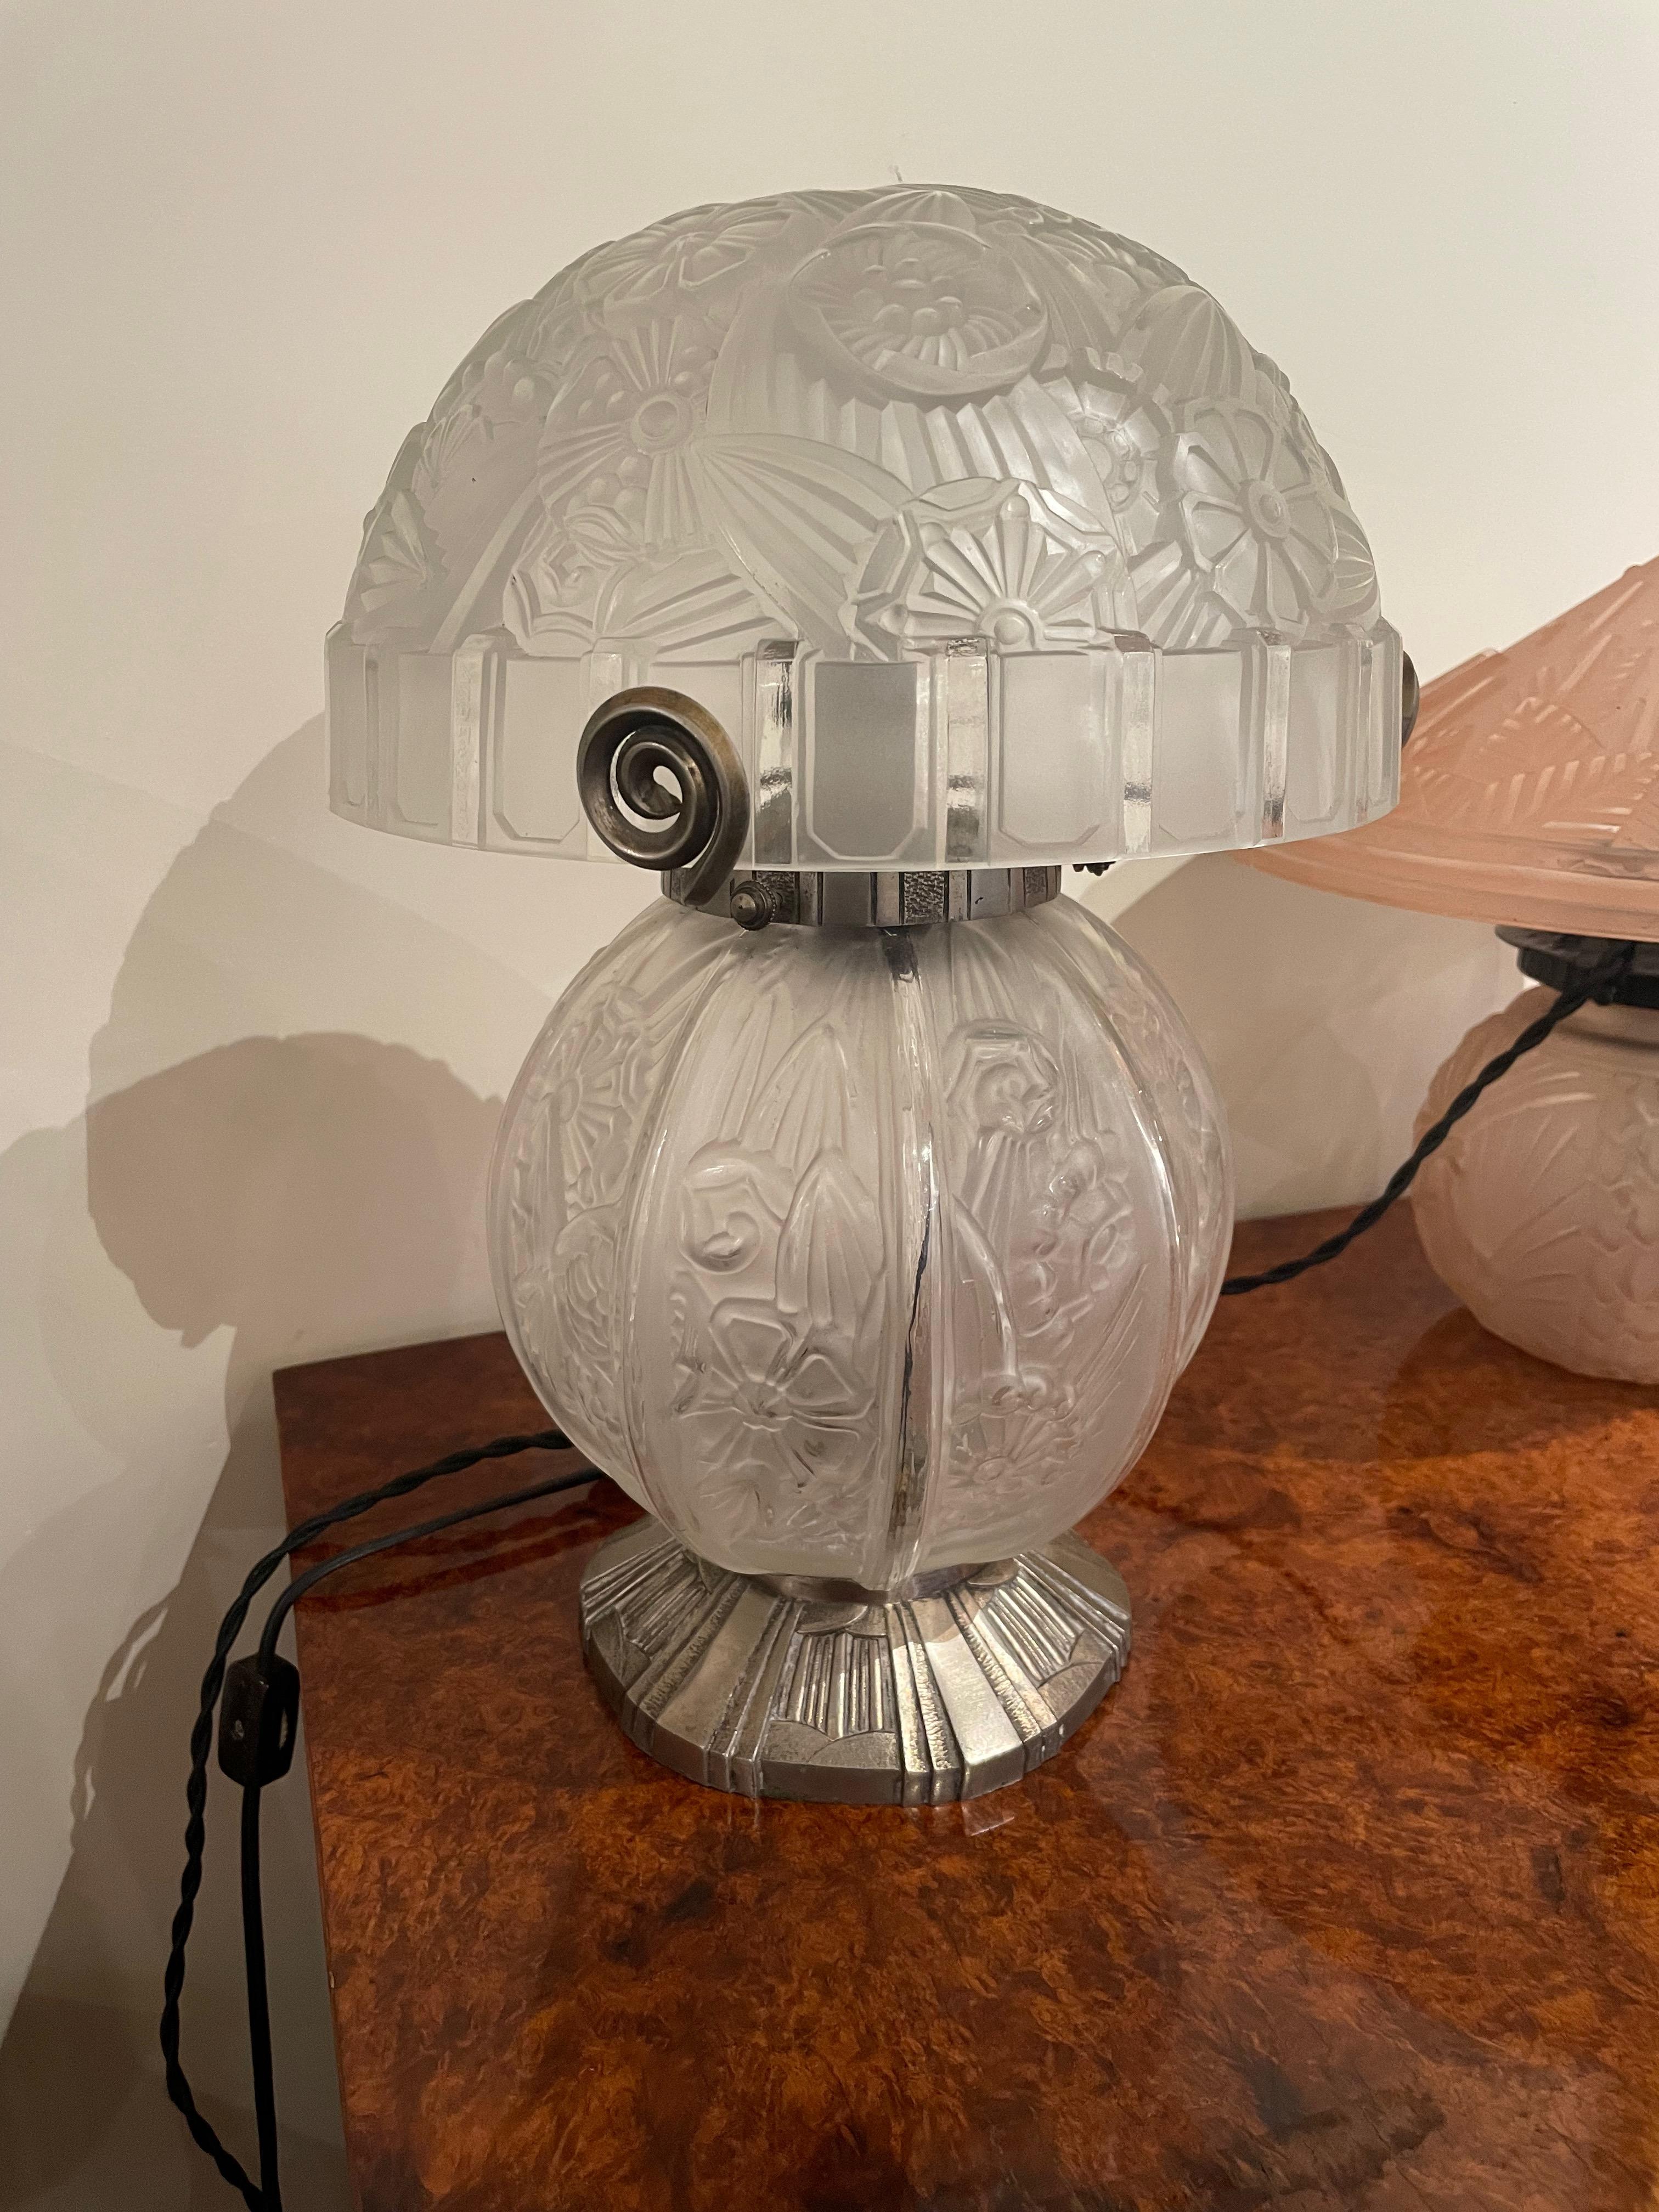 An Art Deco French double globe table lamp by Daum. This beautiful and unusual lamp is crafted in the “pate de verre” technique of thick glass heavily etched and carved in geometric, stylized floral pattern accented with handmade ironwork footing